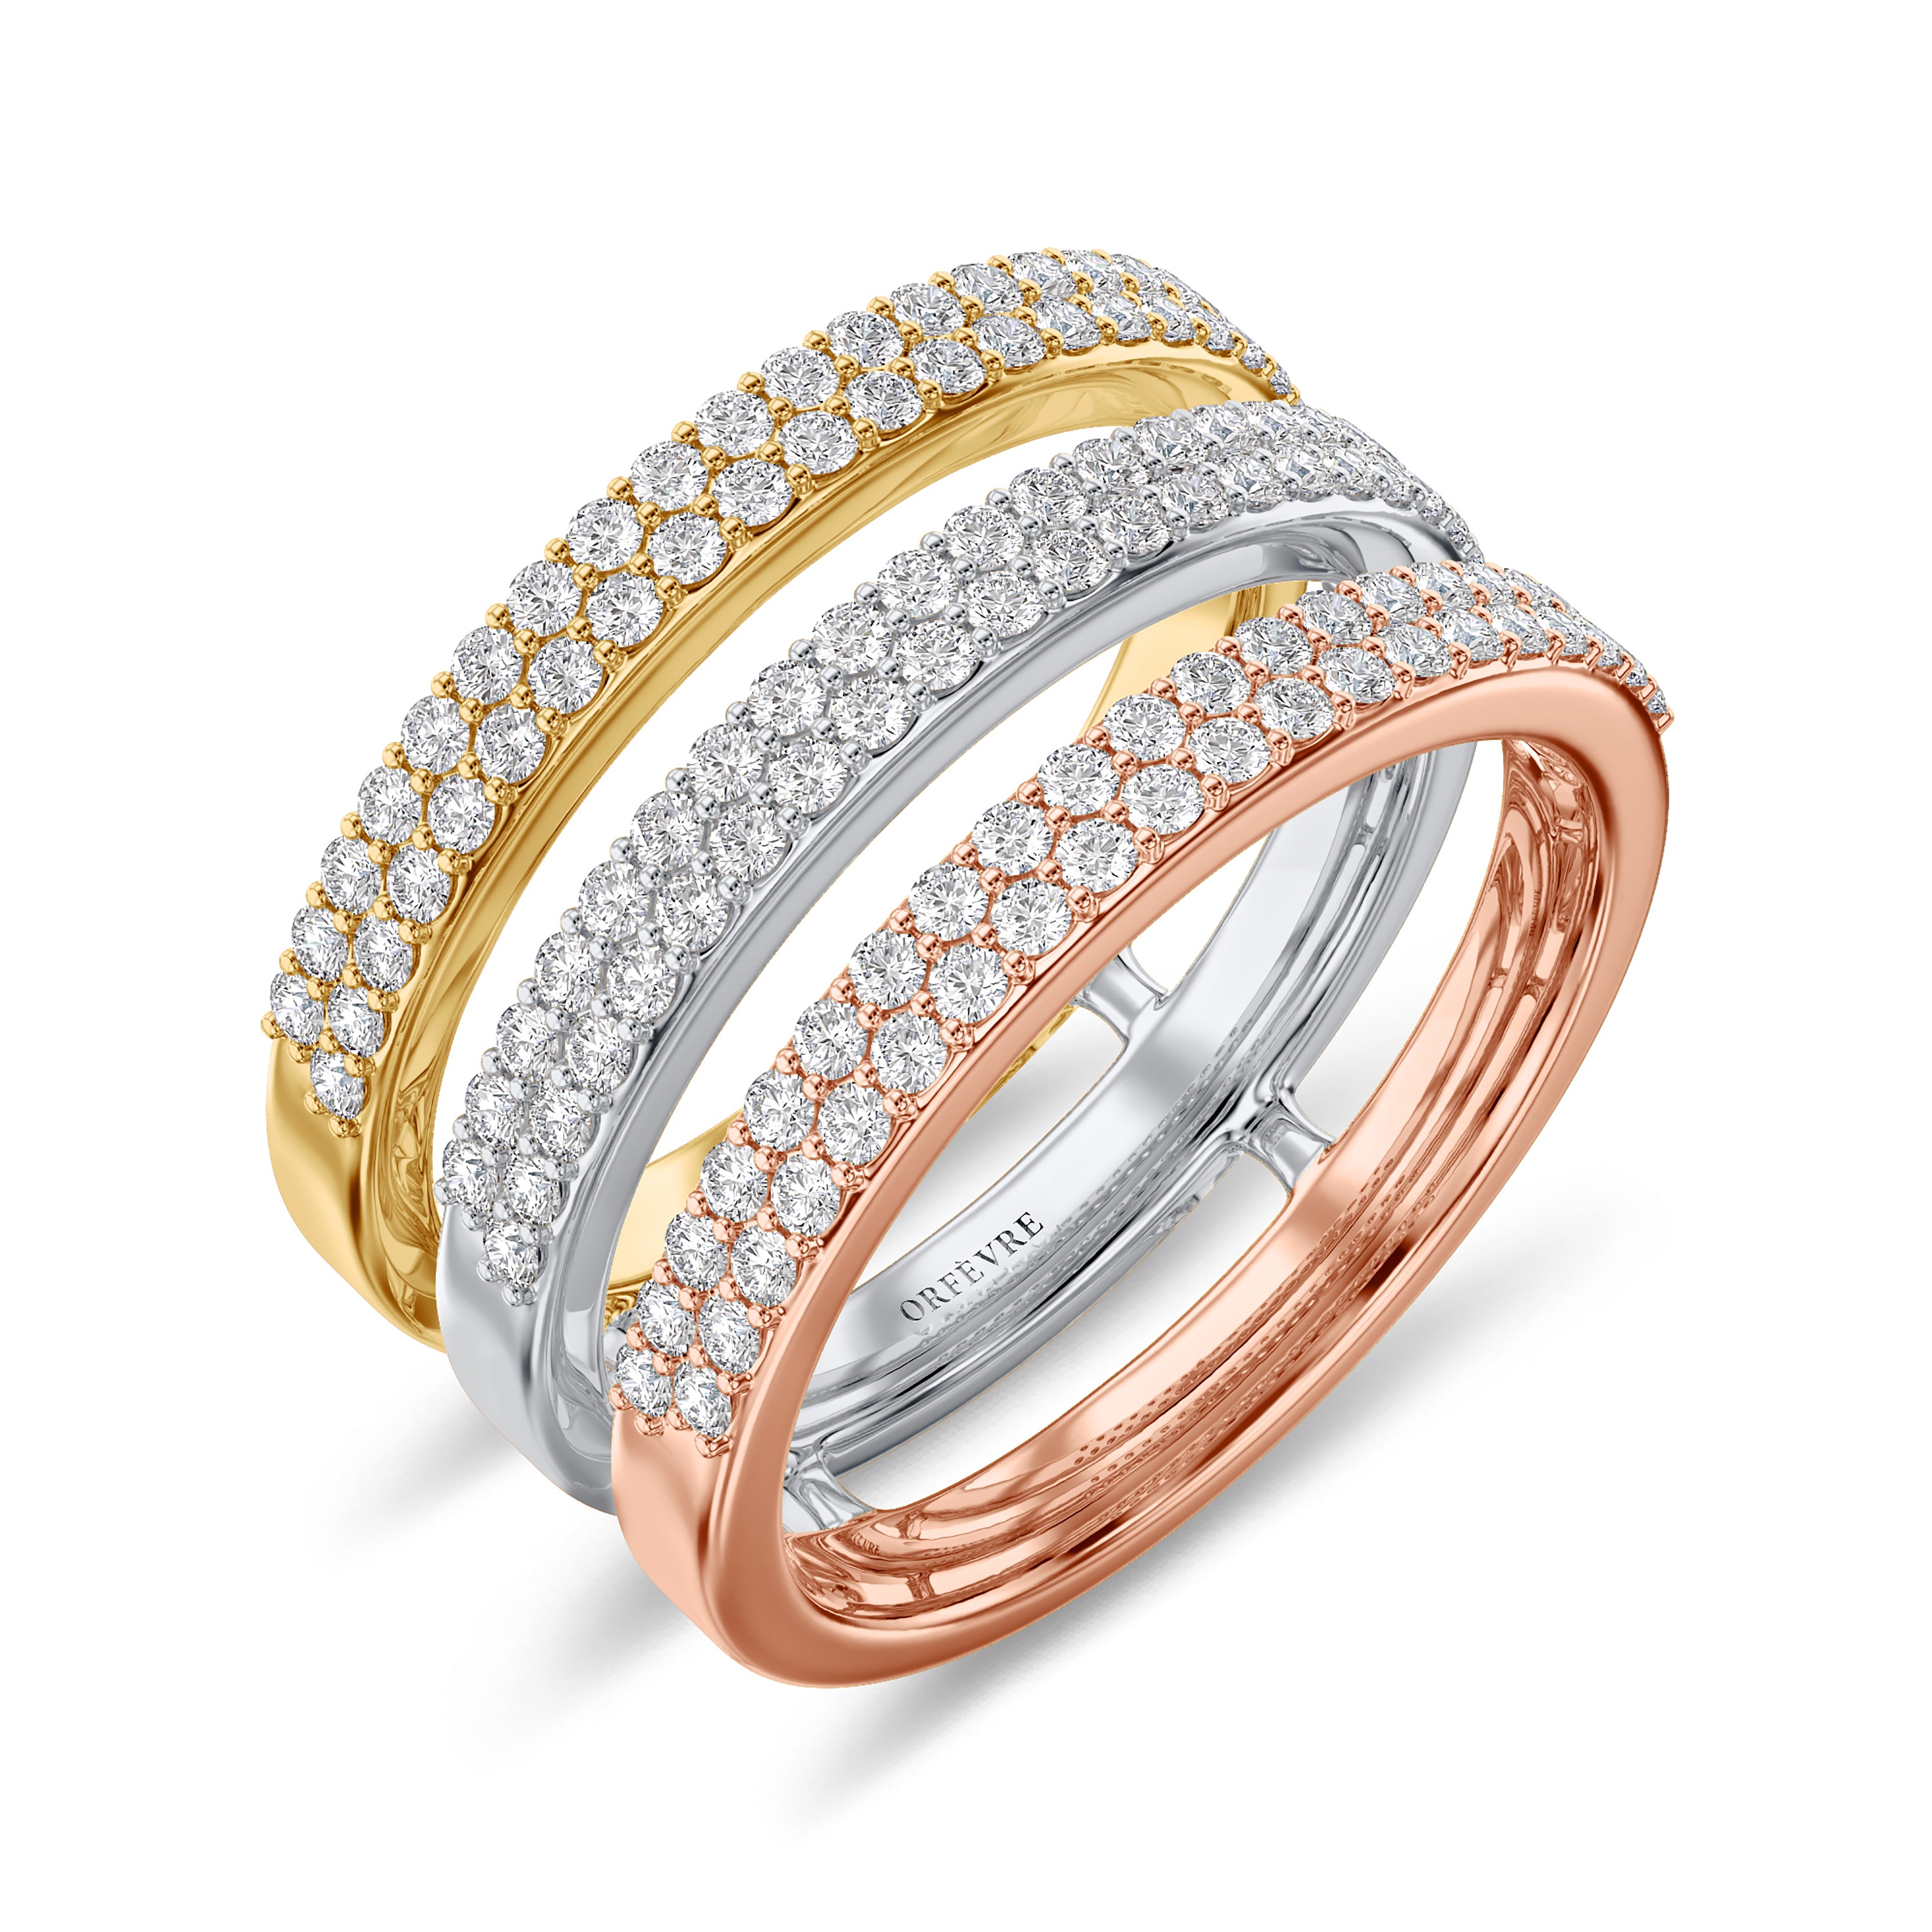 Tri color diamond ring in 18k rose, white and yellow gold, 0.92 carat, FG color, SI clarity 